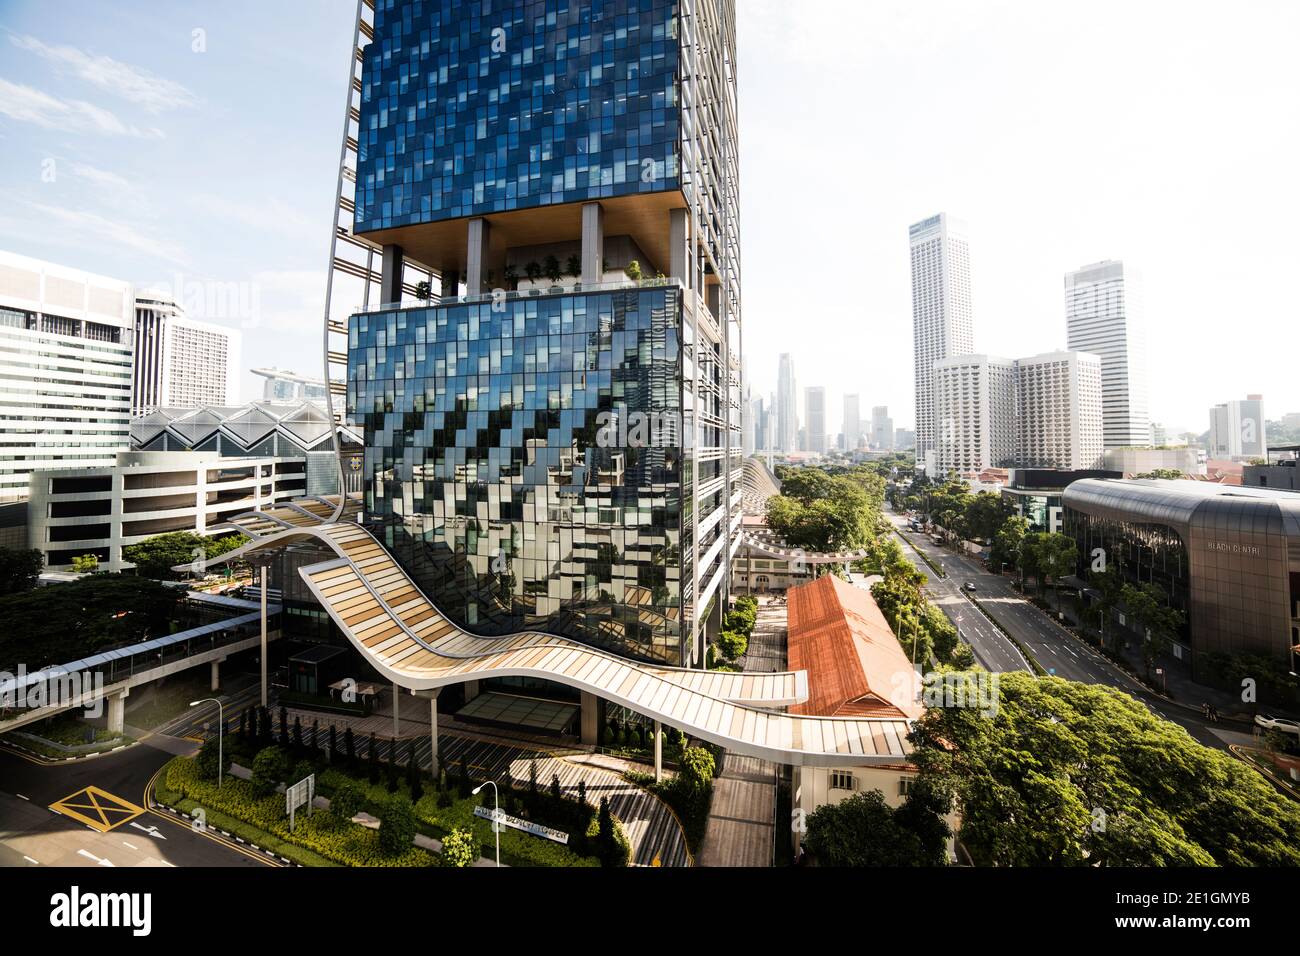 Exterior view of South Beach, a mixed-use development incorporating former military buildings, Singapore. Stock Photo